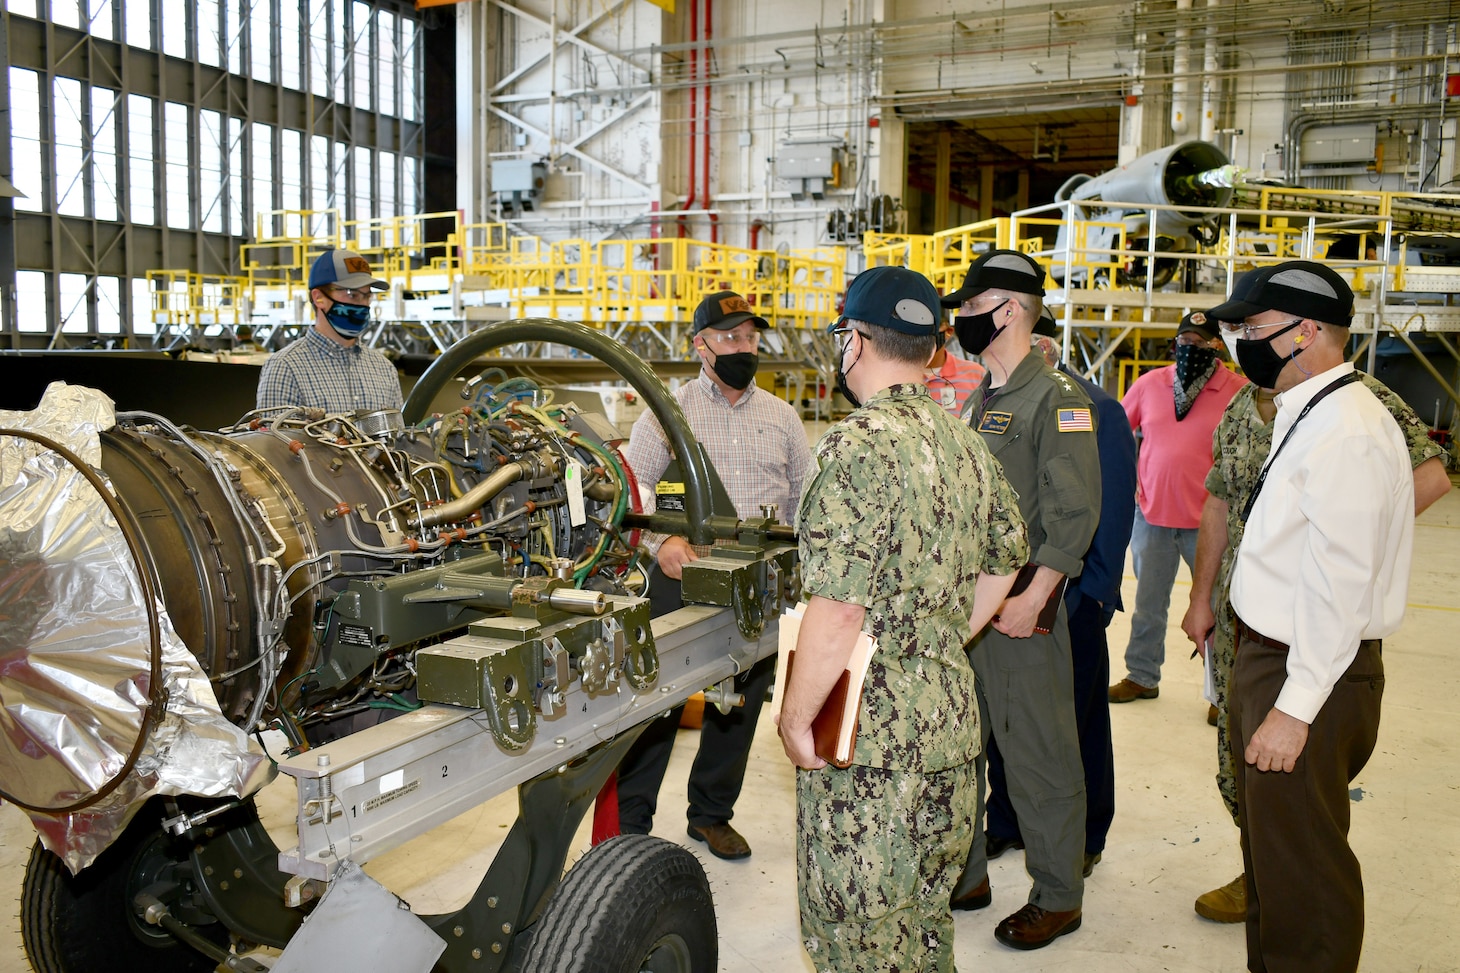 Leaders from Naval Air Systems Command; Commander, Fleet Readiness Centers; and Fleet Readiness Center East discuss V-22 Osprey maintenance and overhaul.